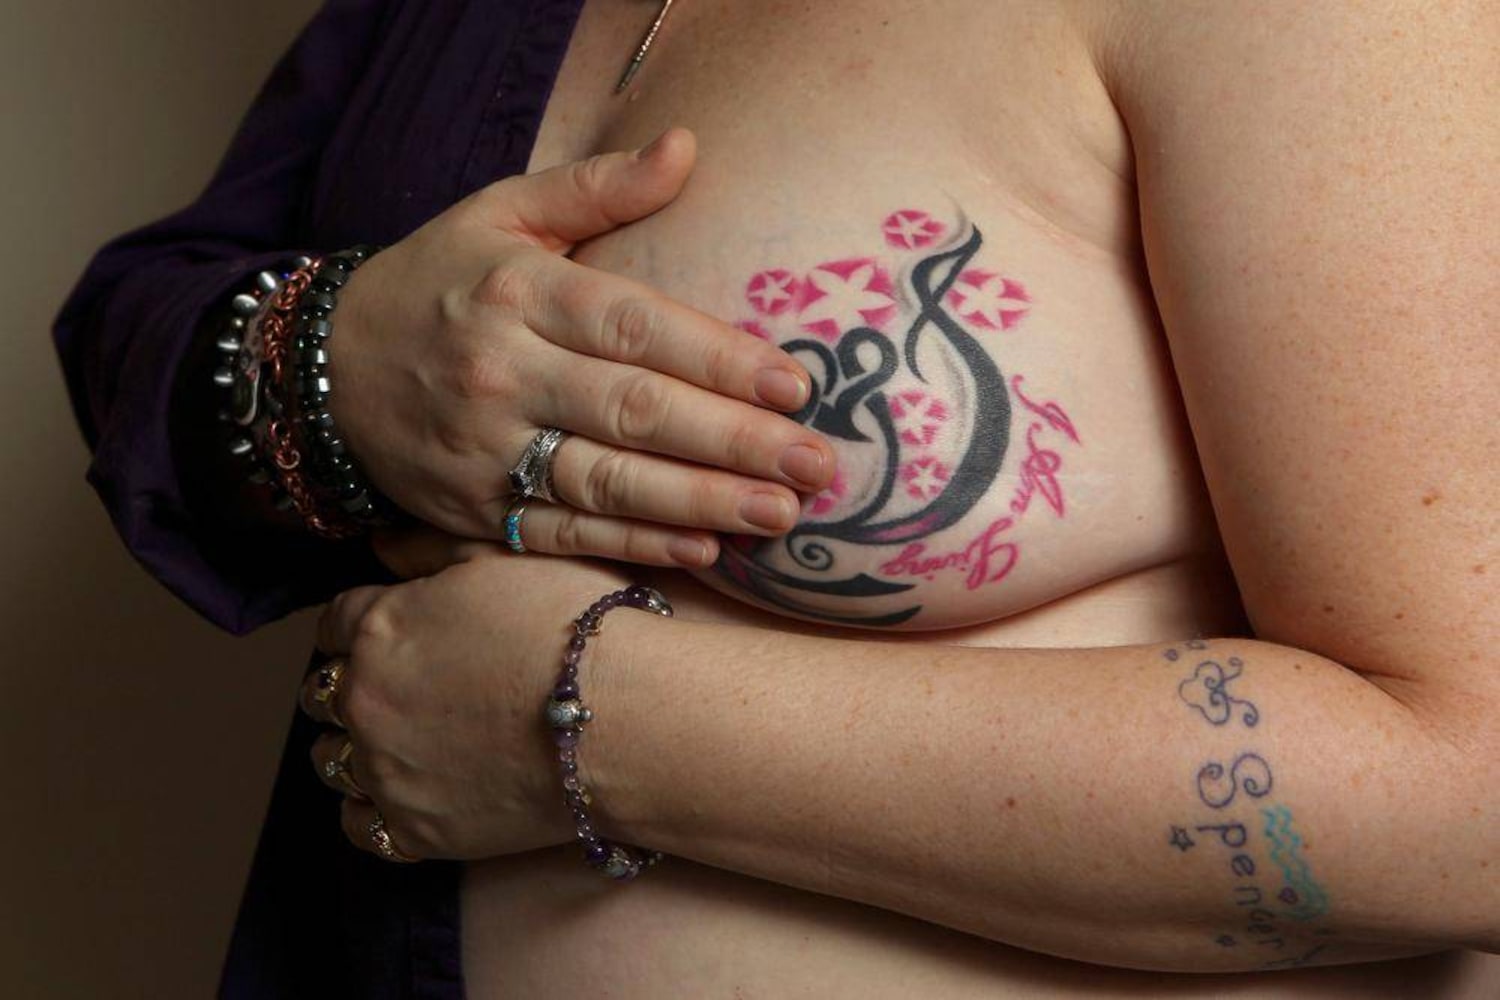 Facebook Removes Photo Of Breast Cancer Survivor's Tattoo, Users